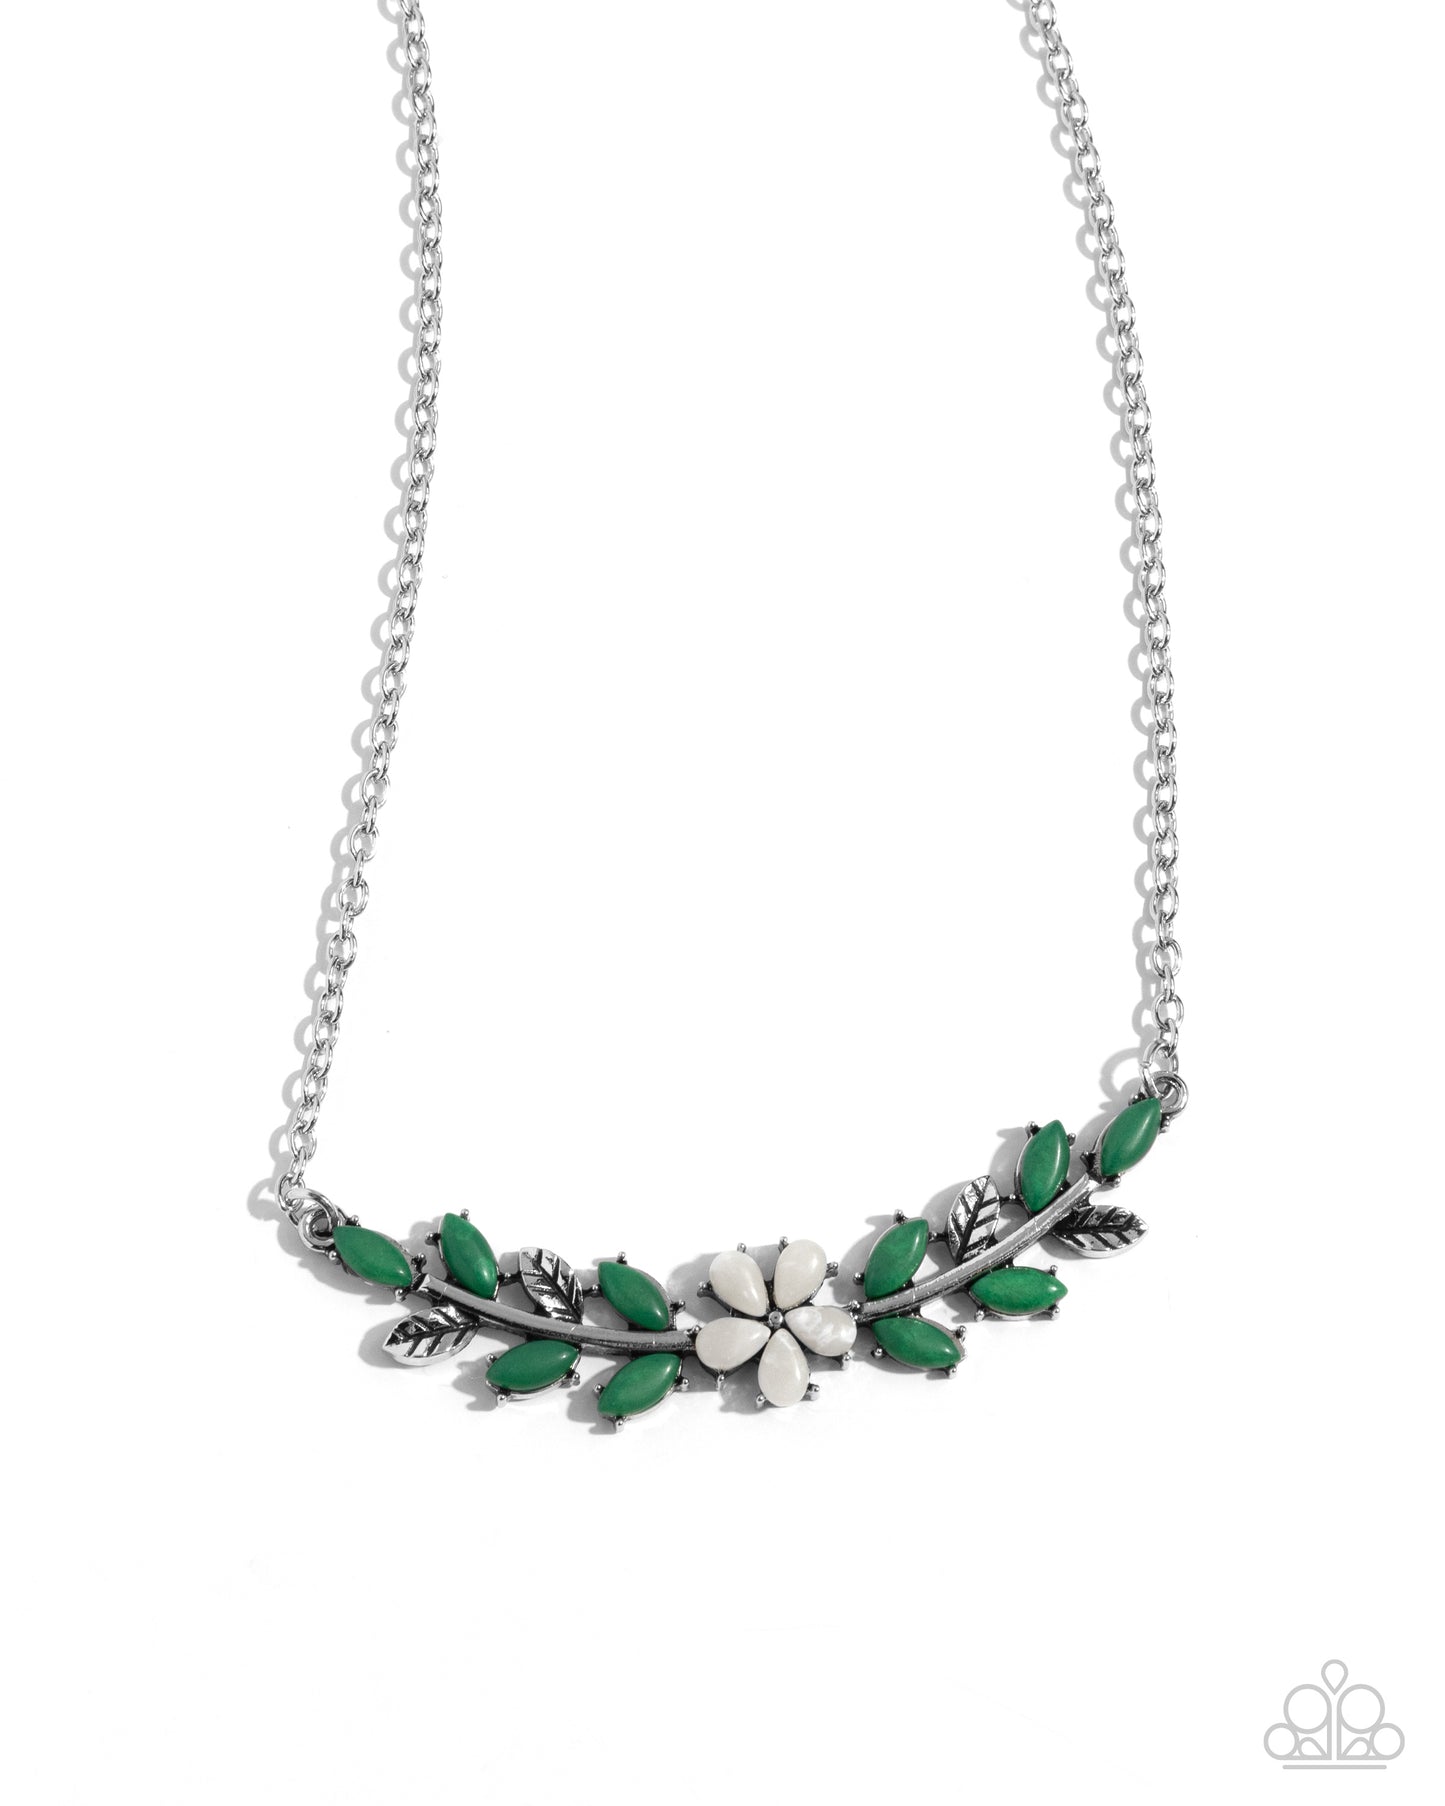 Leafy Layover - White Bead Flower/Green Bead Leaves Paparazzi Necklace & matching earrings